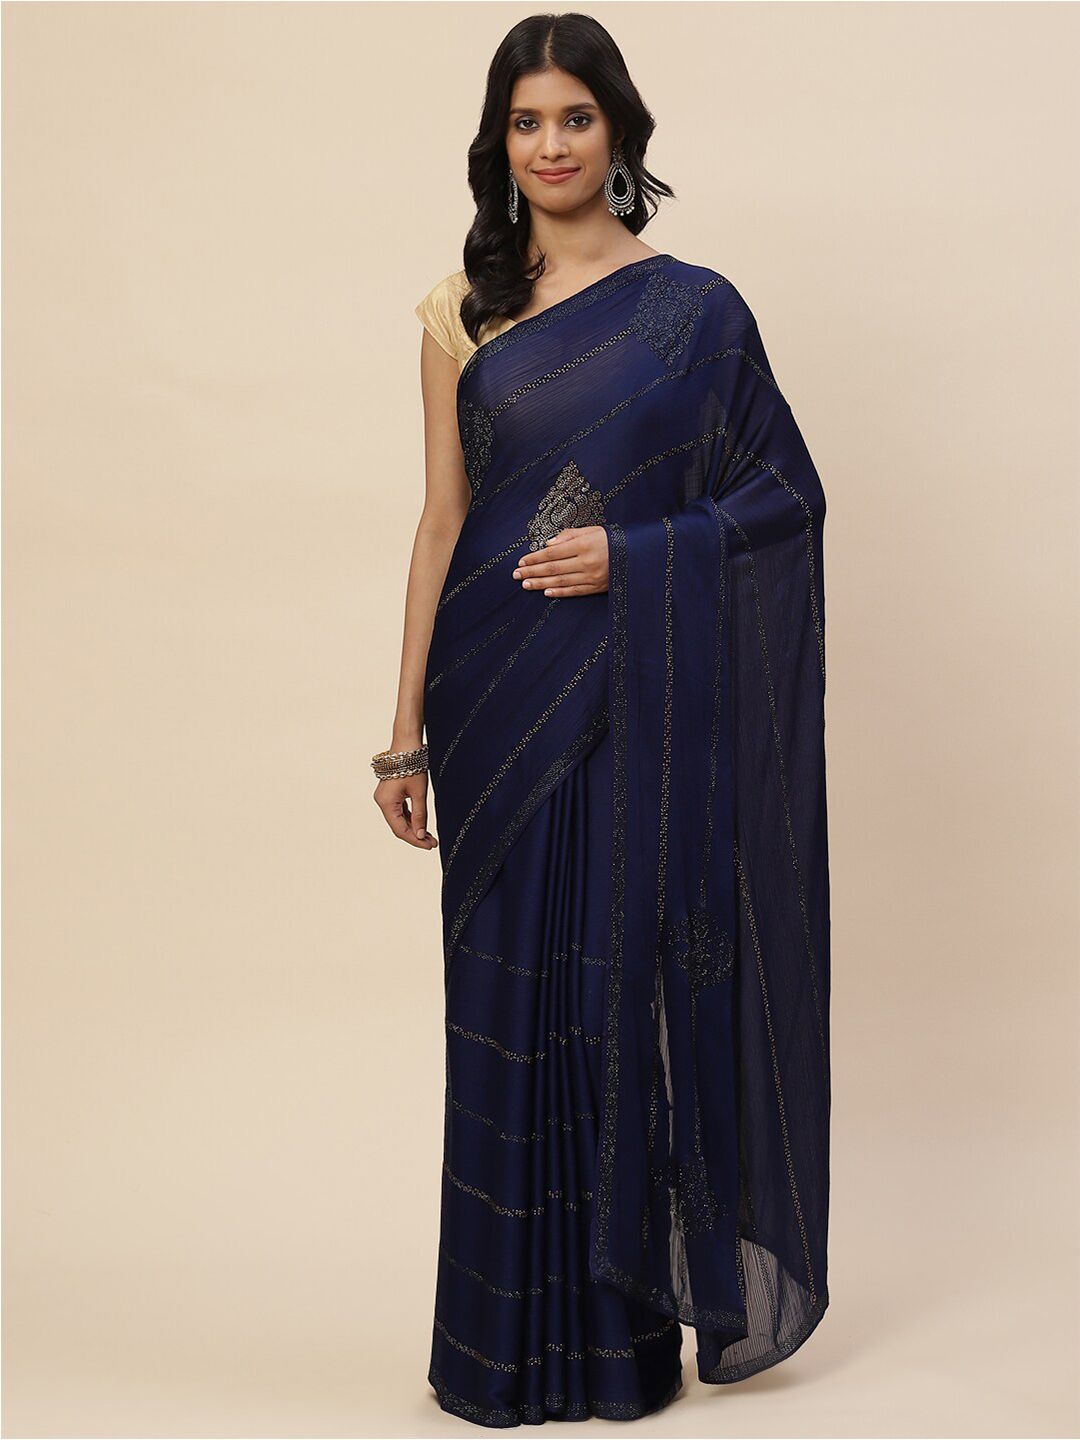 Meena Bazaar Women Navy Blue & Gold-Toned Embellished Beads and Stones Saree Price in India